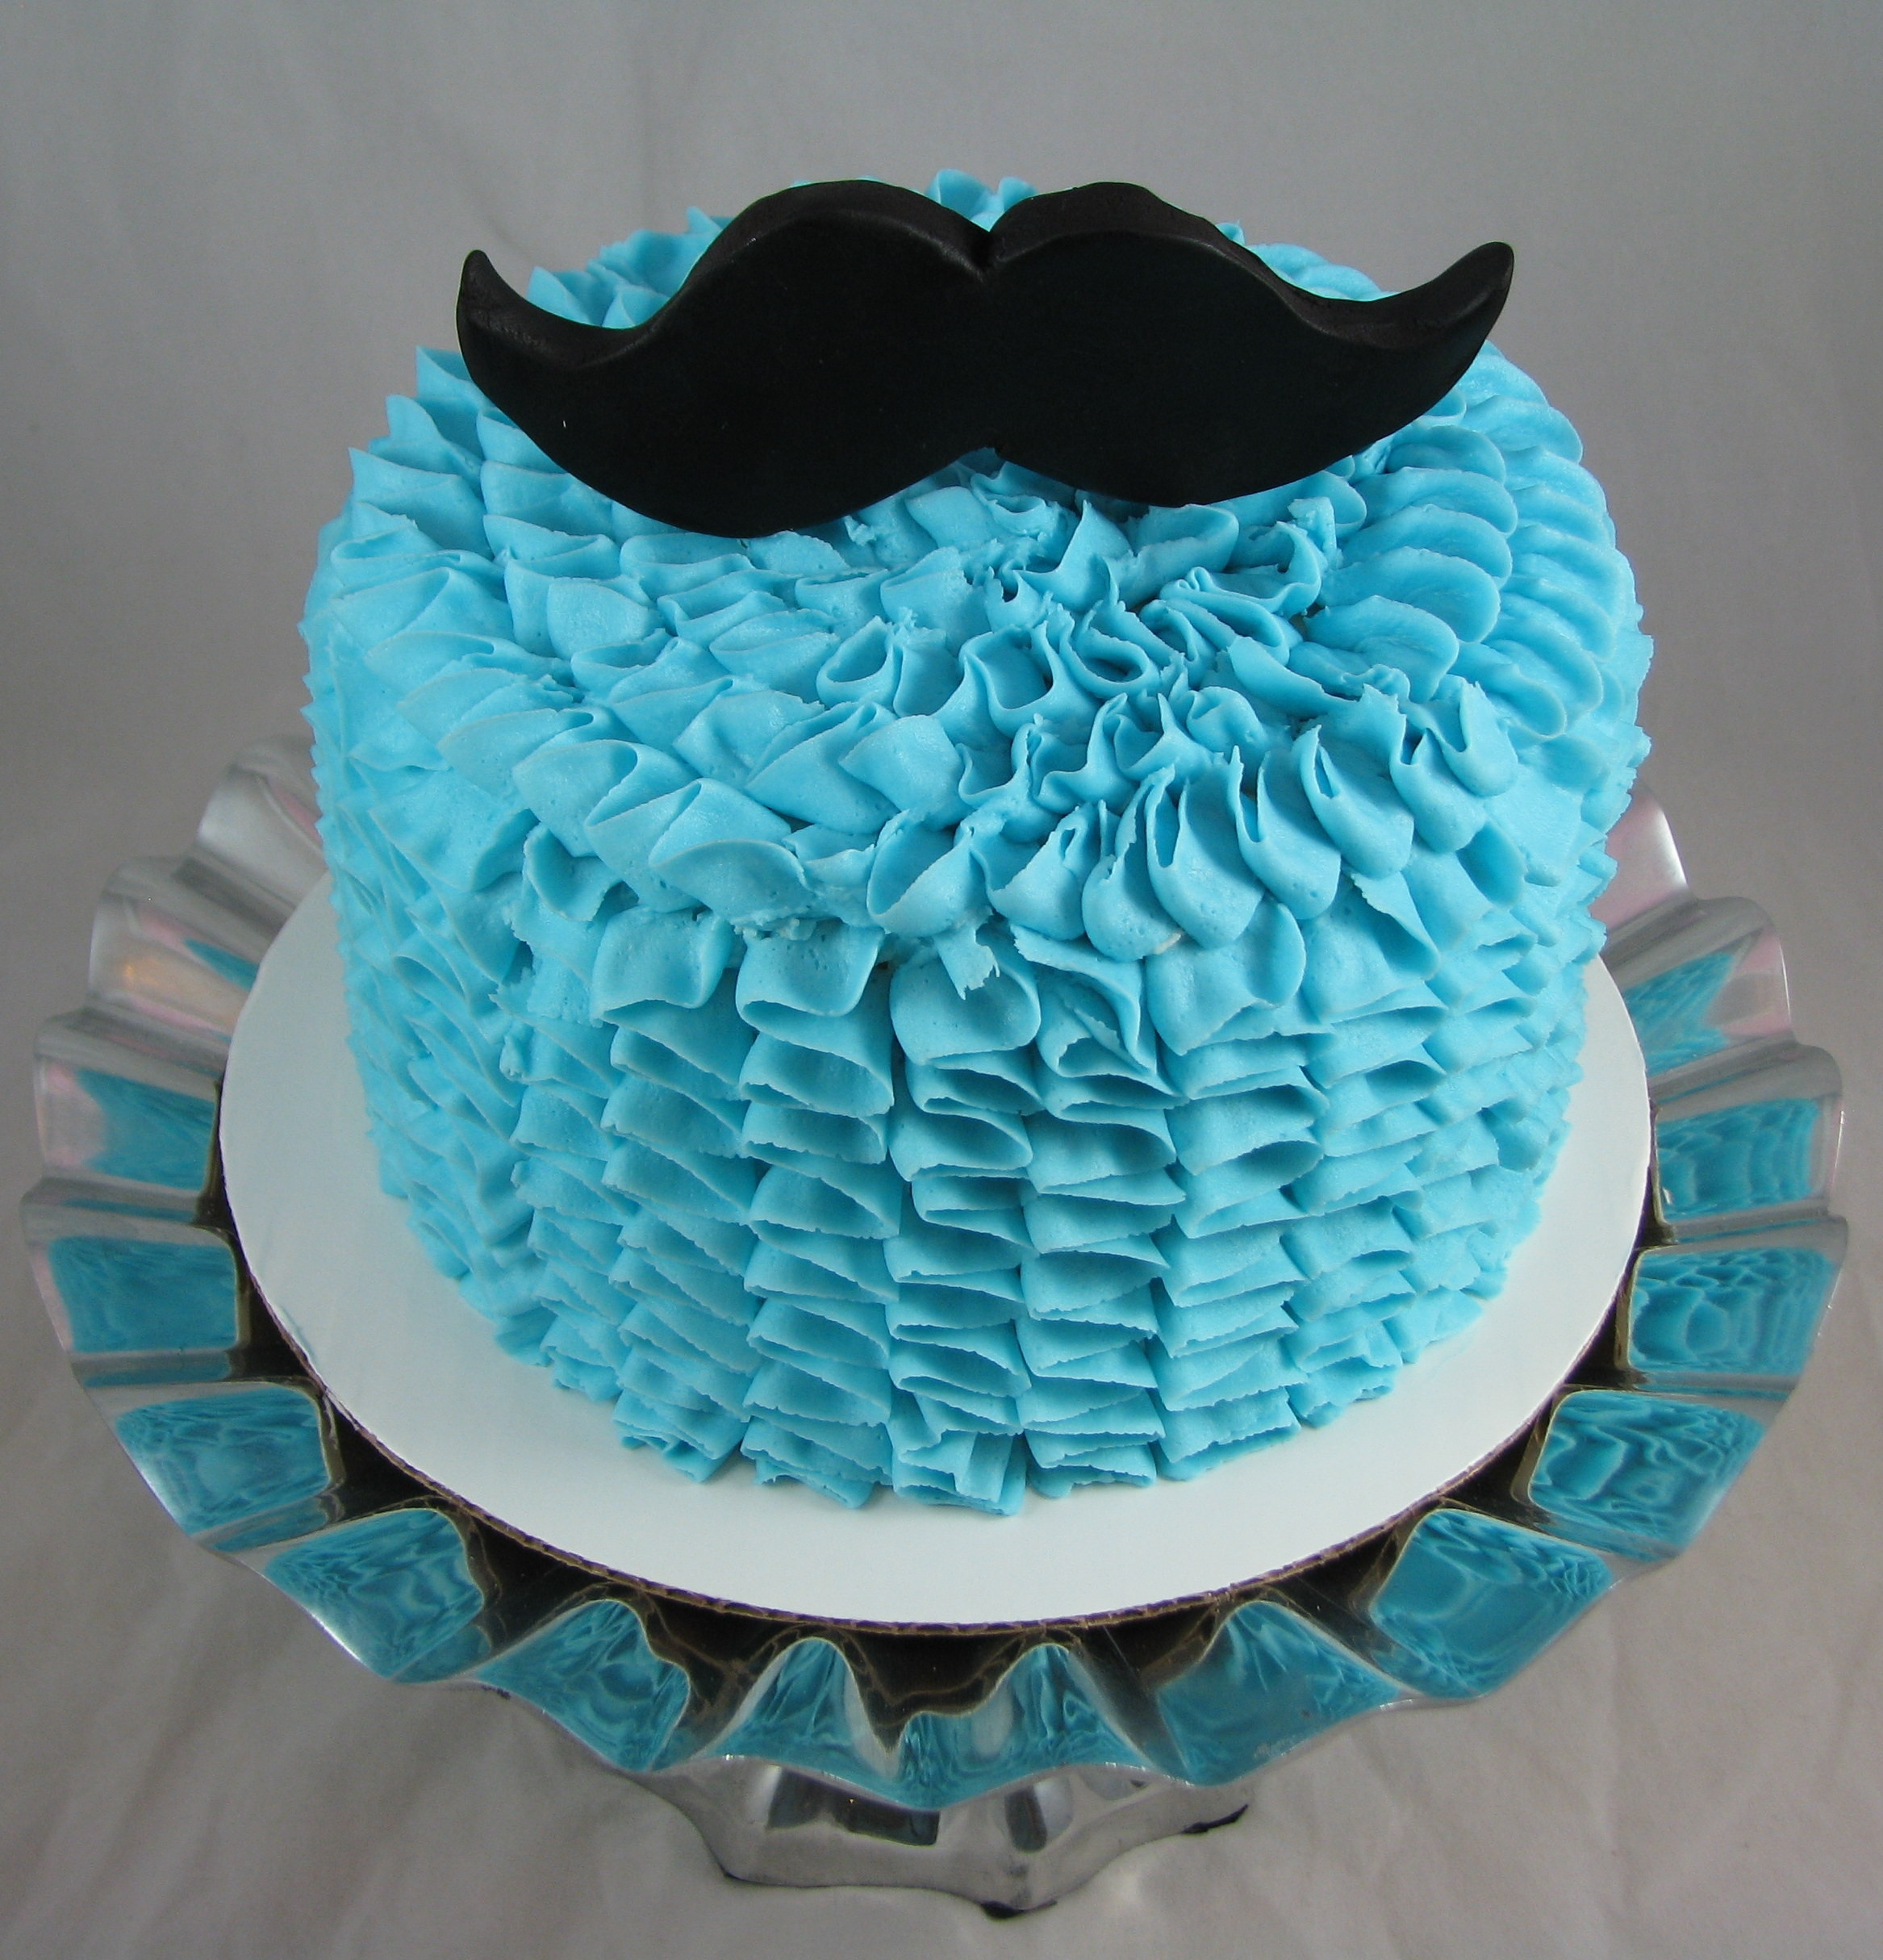 Mustache Birthday Cakes
 Blue Ruffle Mustache Cake CakeCentral